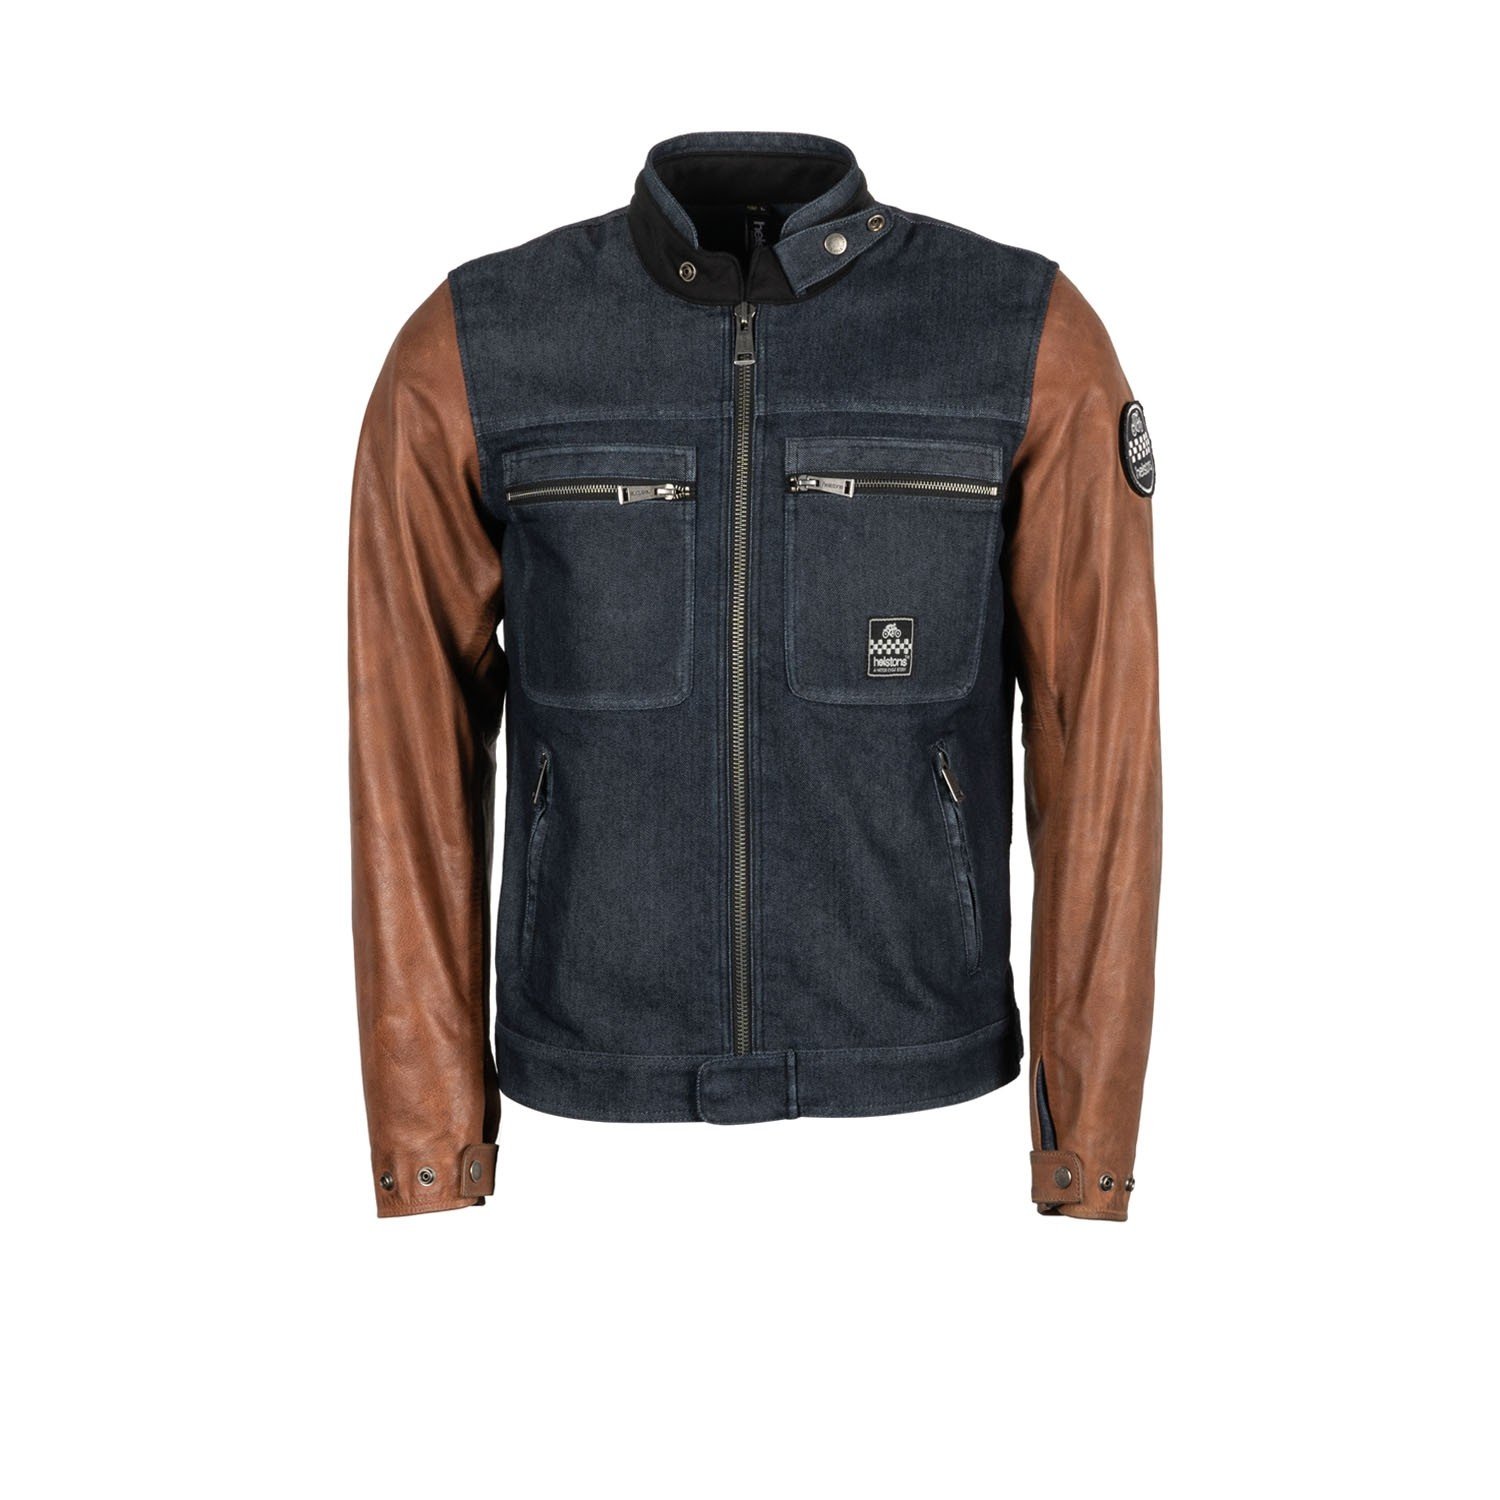 Image of Helstons Winston Canvas Cotton Leather Jacket Blue Brown Size M ID 3662136084124